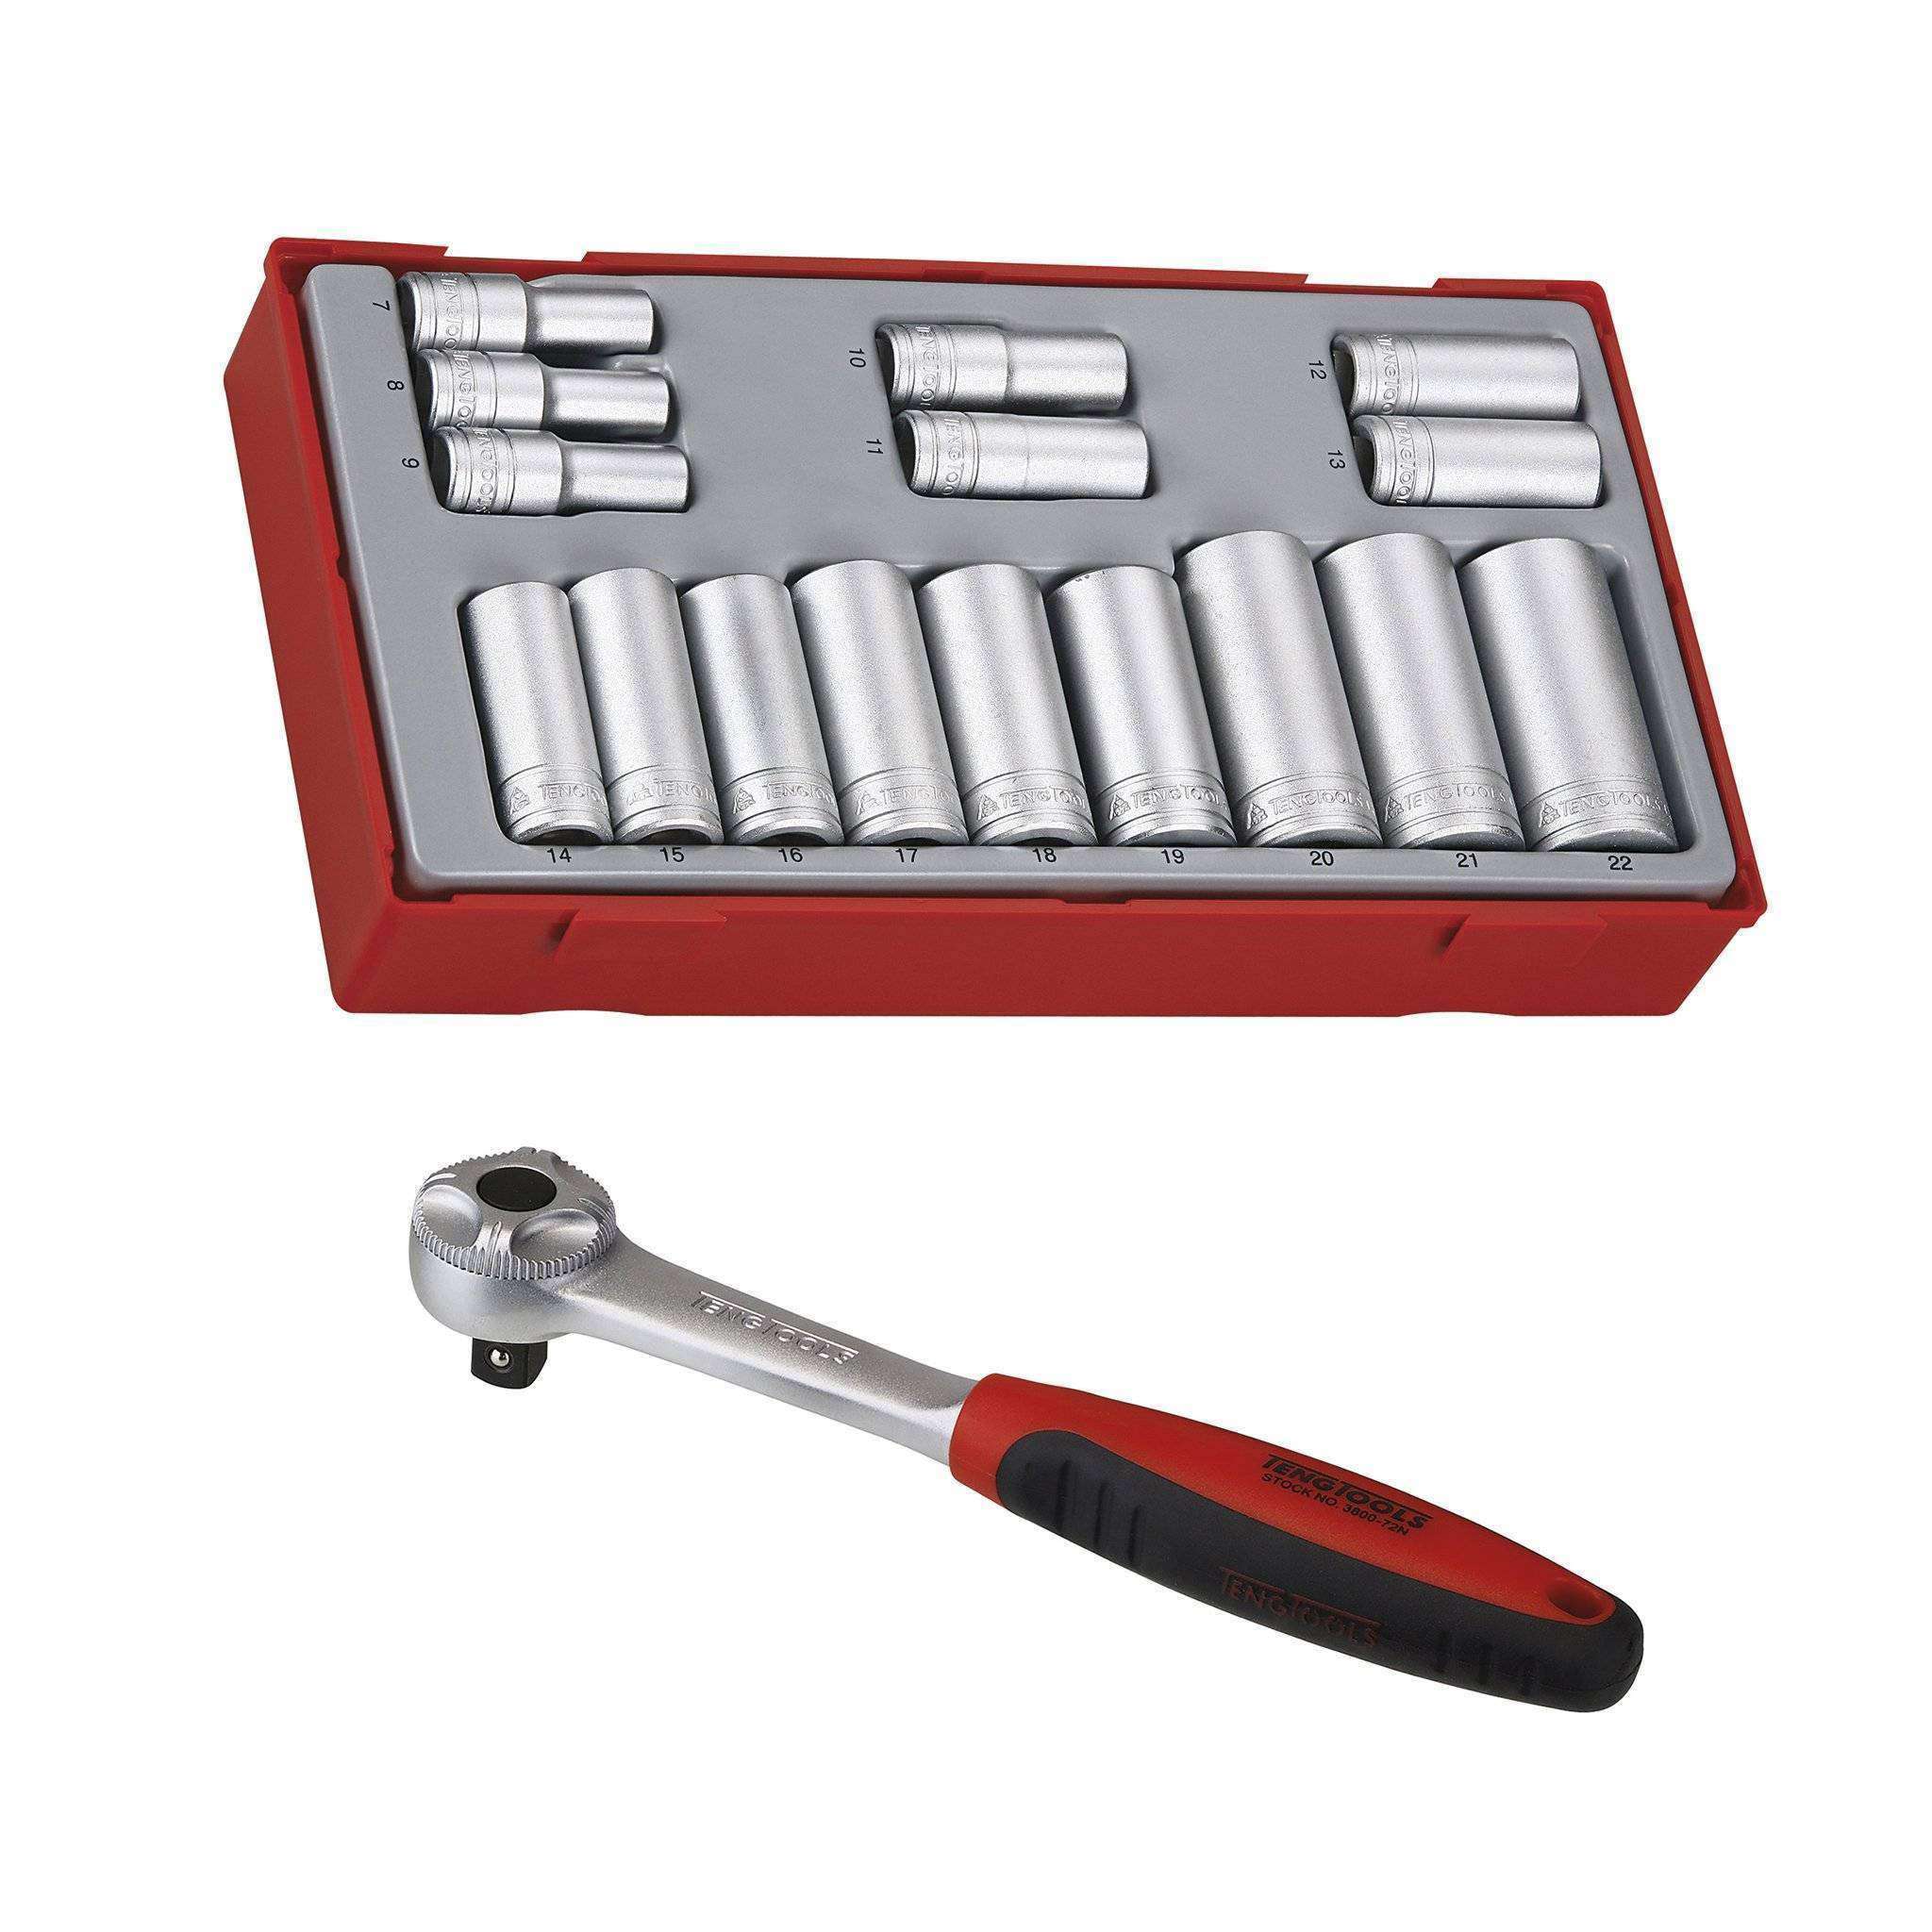 Teng Tools 3/8 Inch 16 Piece 6 Point 7 to 22mm Deep Sockets and 72 Teeth Ratchet Set Bundle